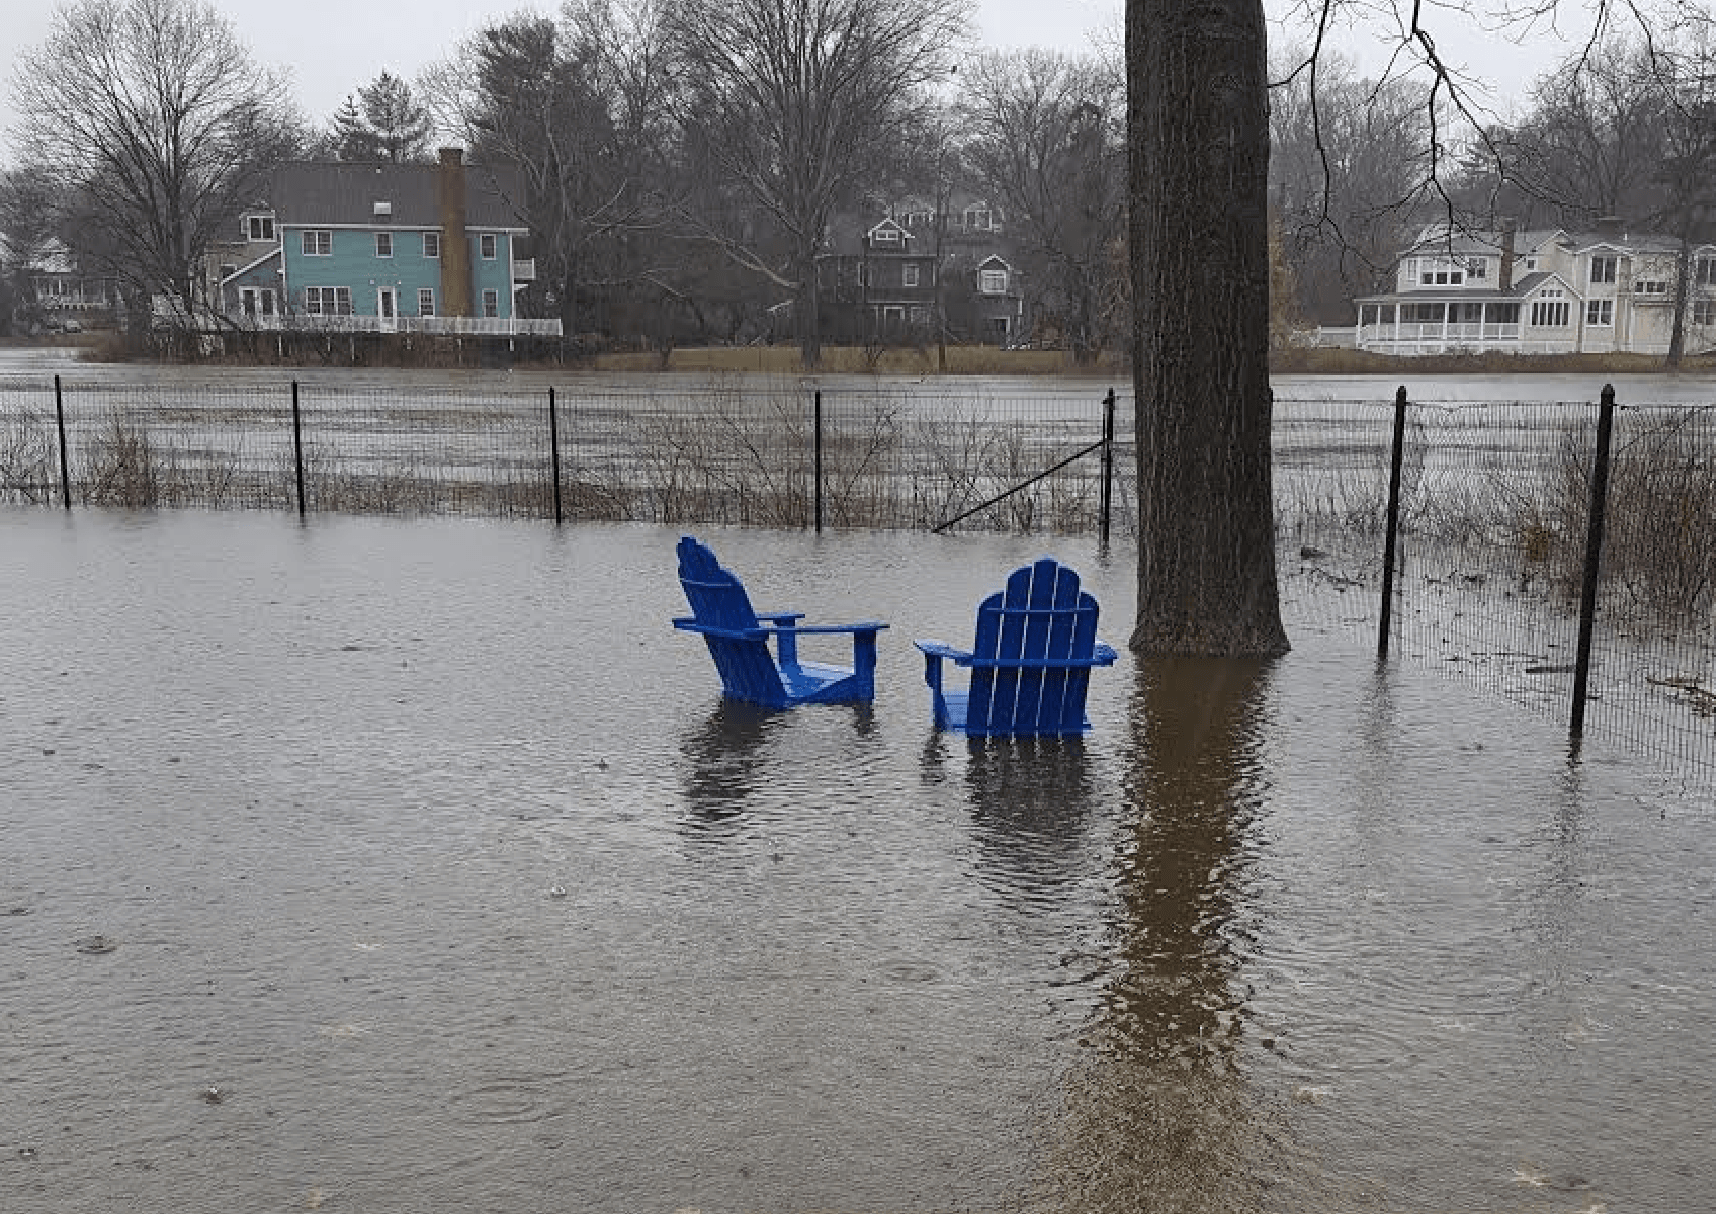 Flooding in Old Greenwich, contributed March 2, 2018